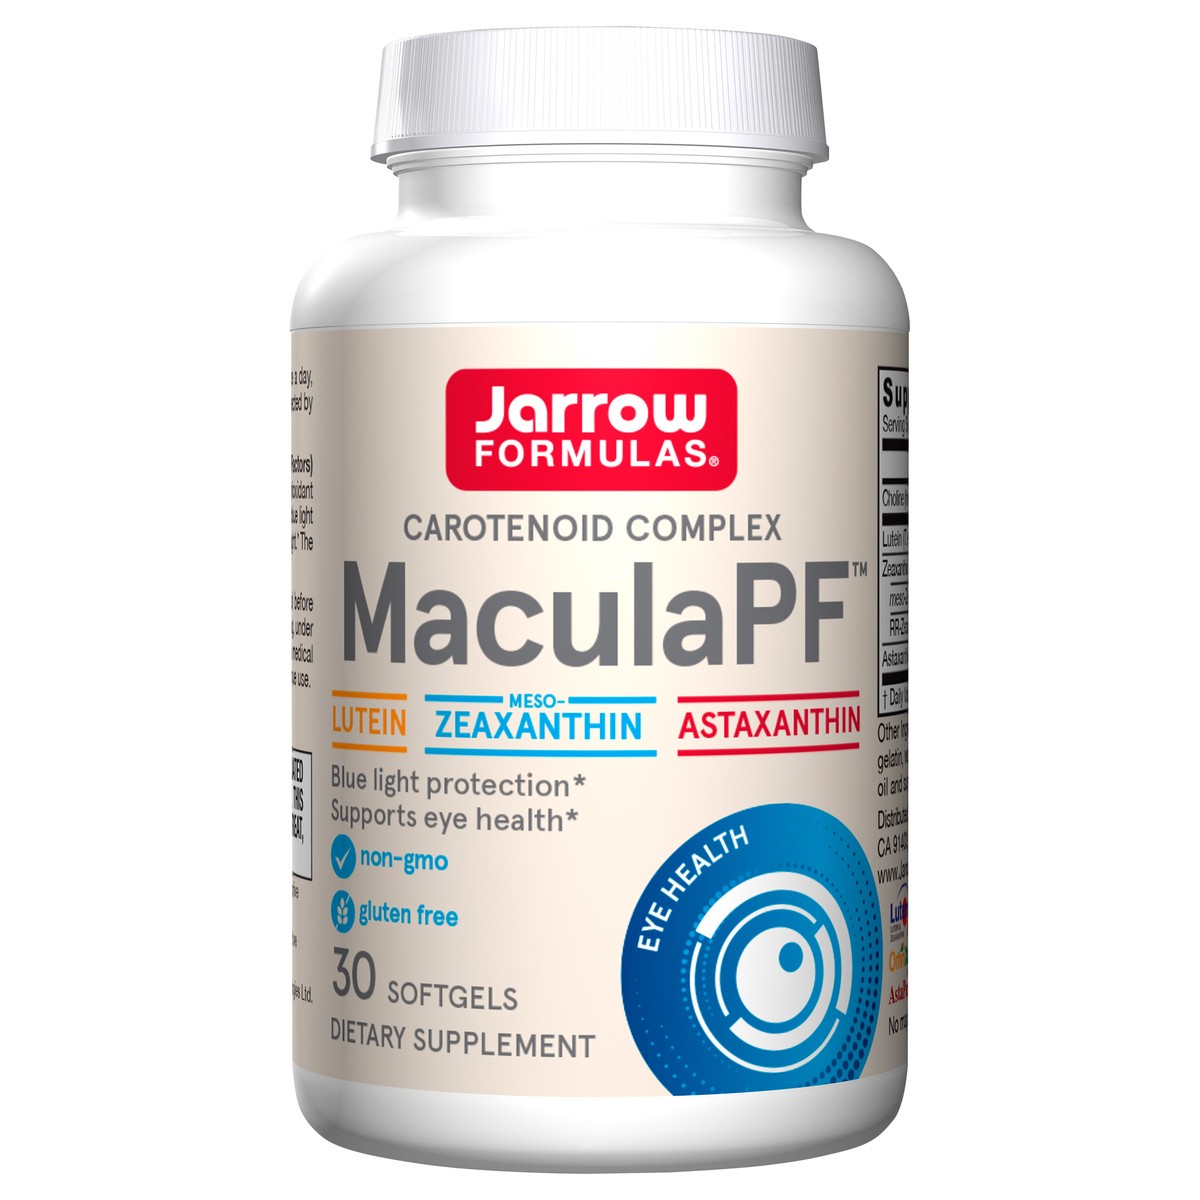 slide 1 of 2, Jarrow Formulas MaculaPF - 30 Softgels - Blue Light Protection - Supplement Supports Eye Health & the Eyes'' Maculae - Includes Three Key Antioxidant Carotenoids - 30 Servings , 30 ct